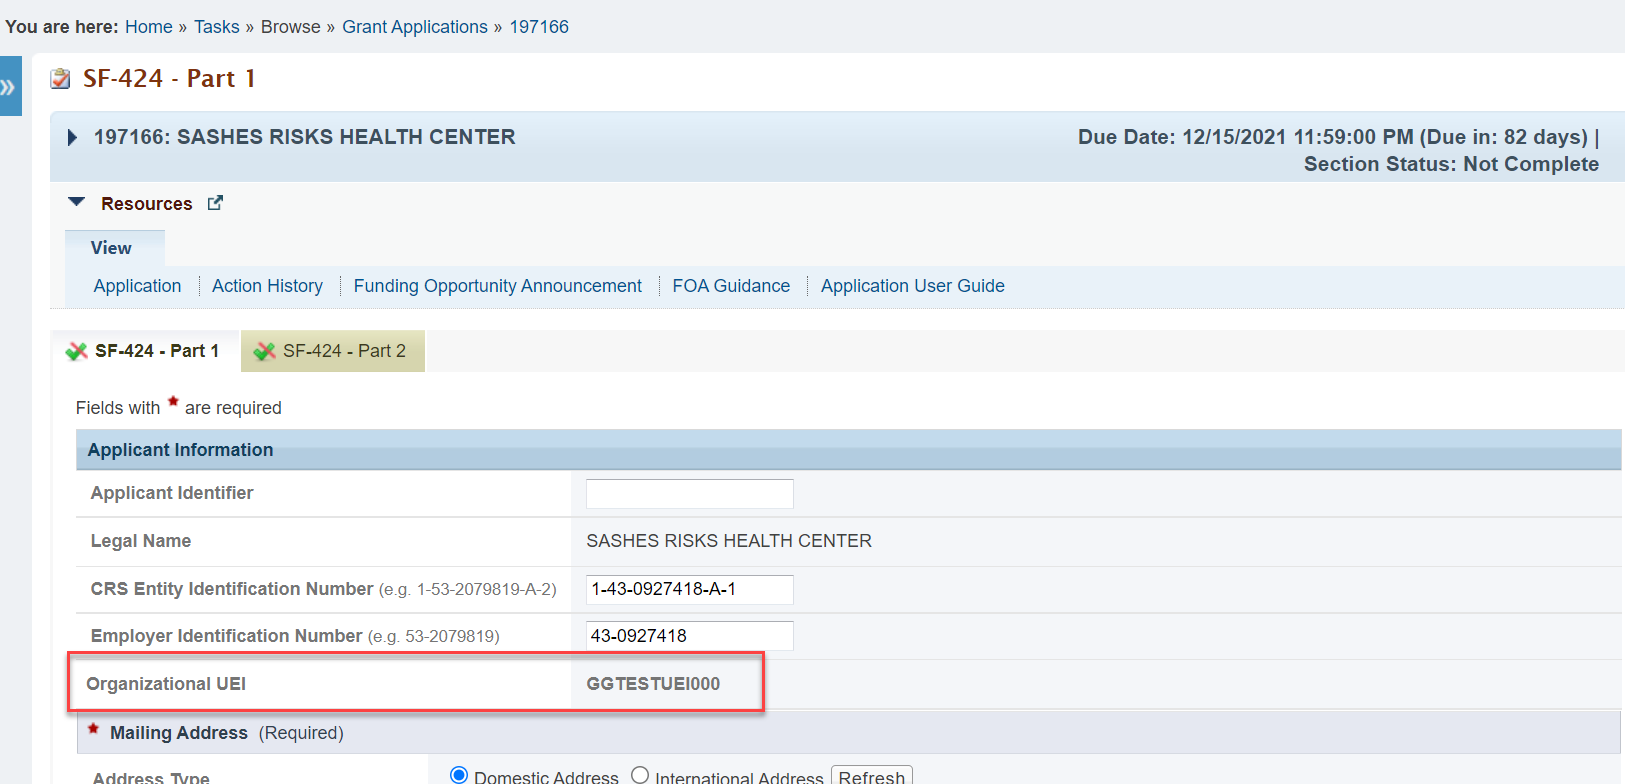 Screenshot of the SF 424 Part 1 form in the EHBs showing the Organizational UEI field